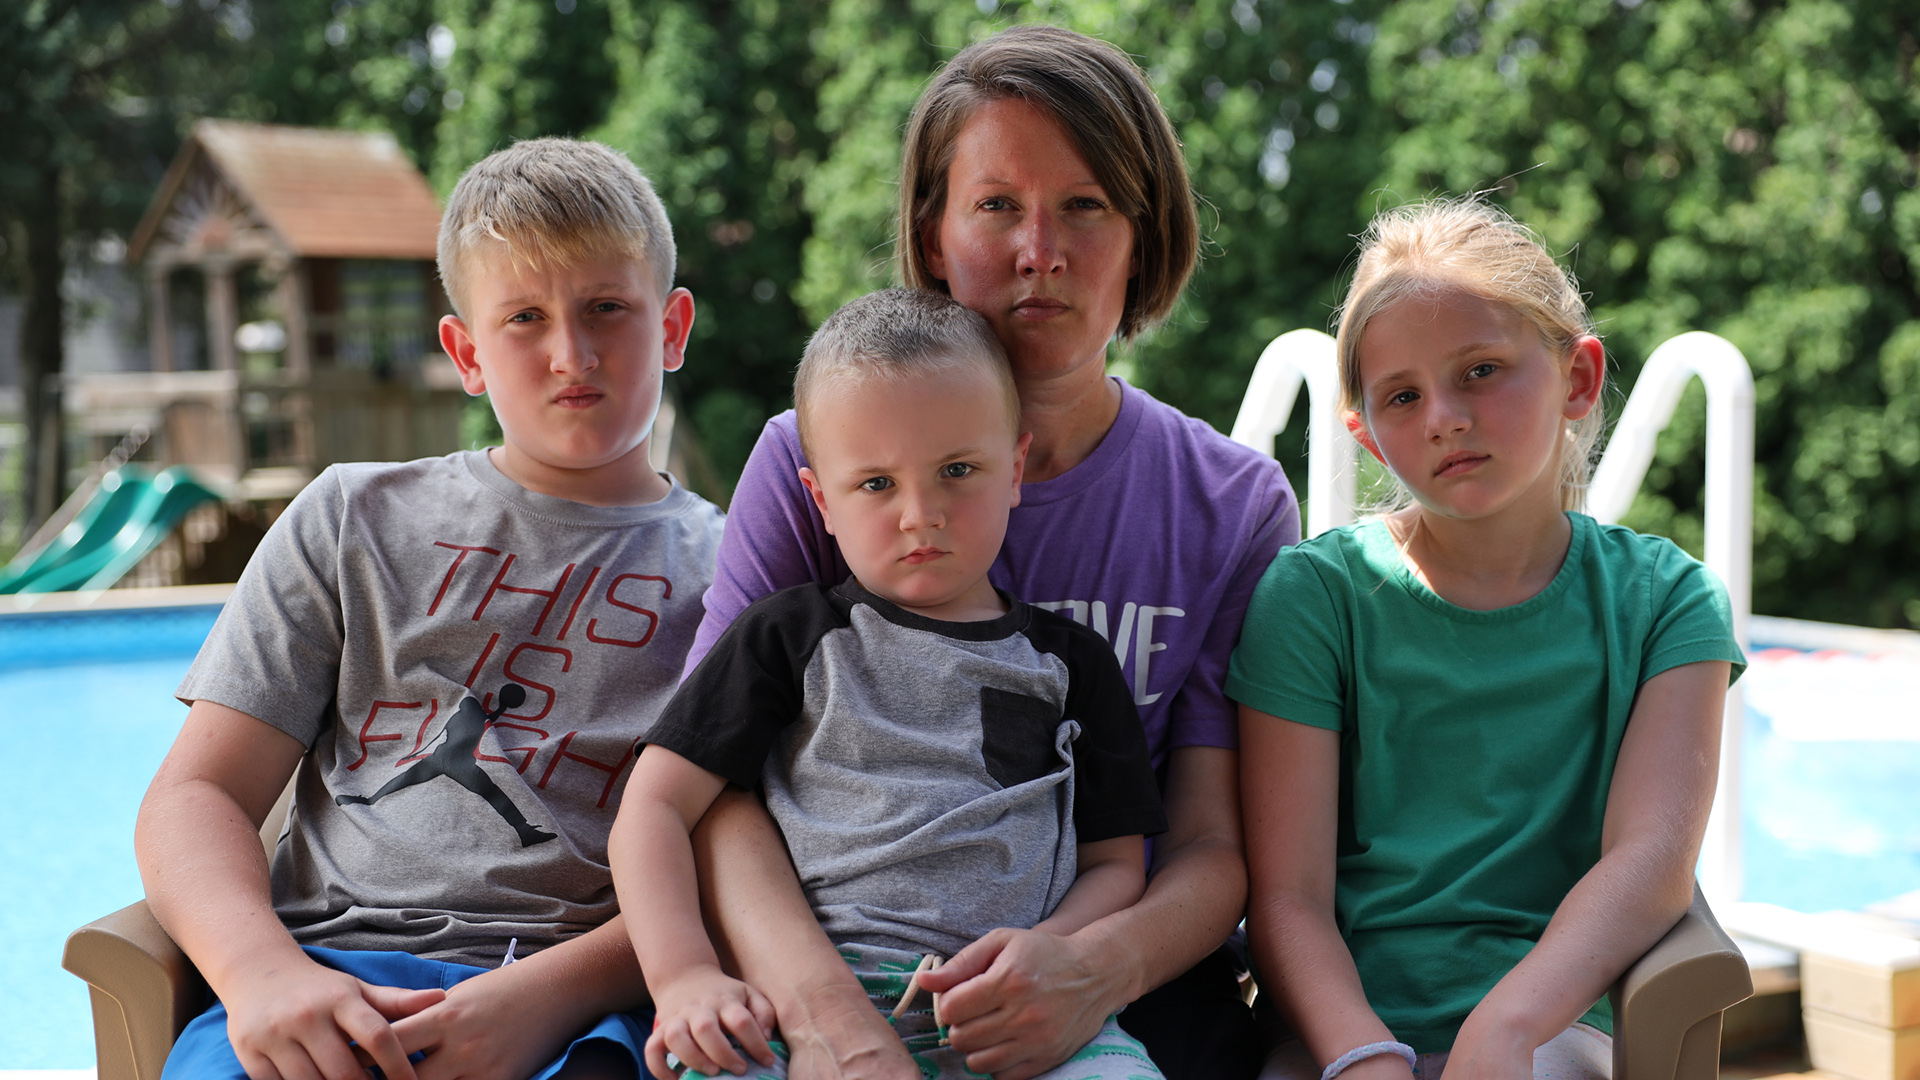 Jameson, Jackson, Heather and Ava Brice pose for a portrait while seated outdoors, with a pool, play structure and trees in the background.